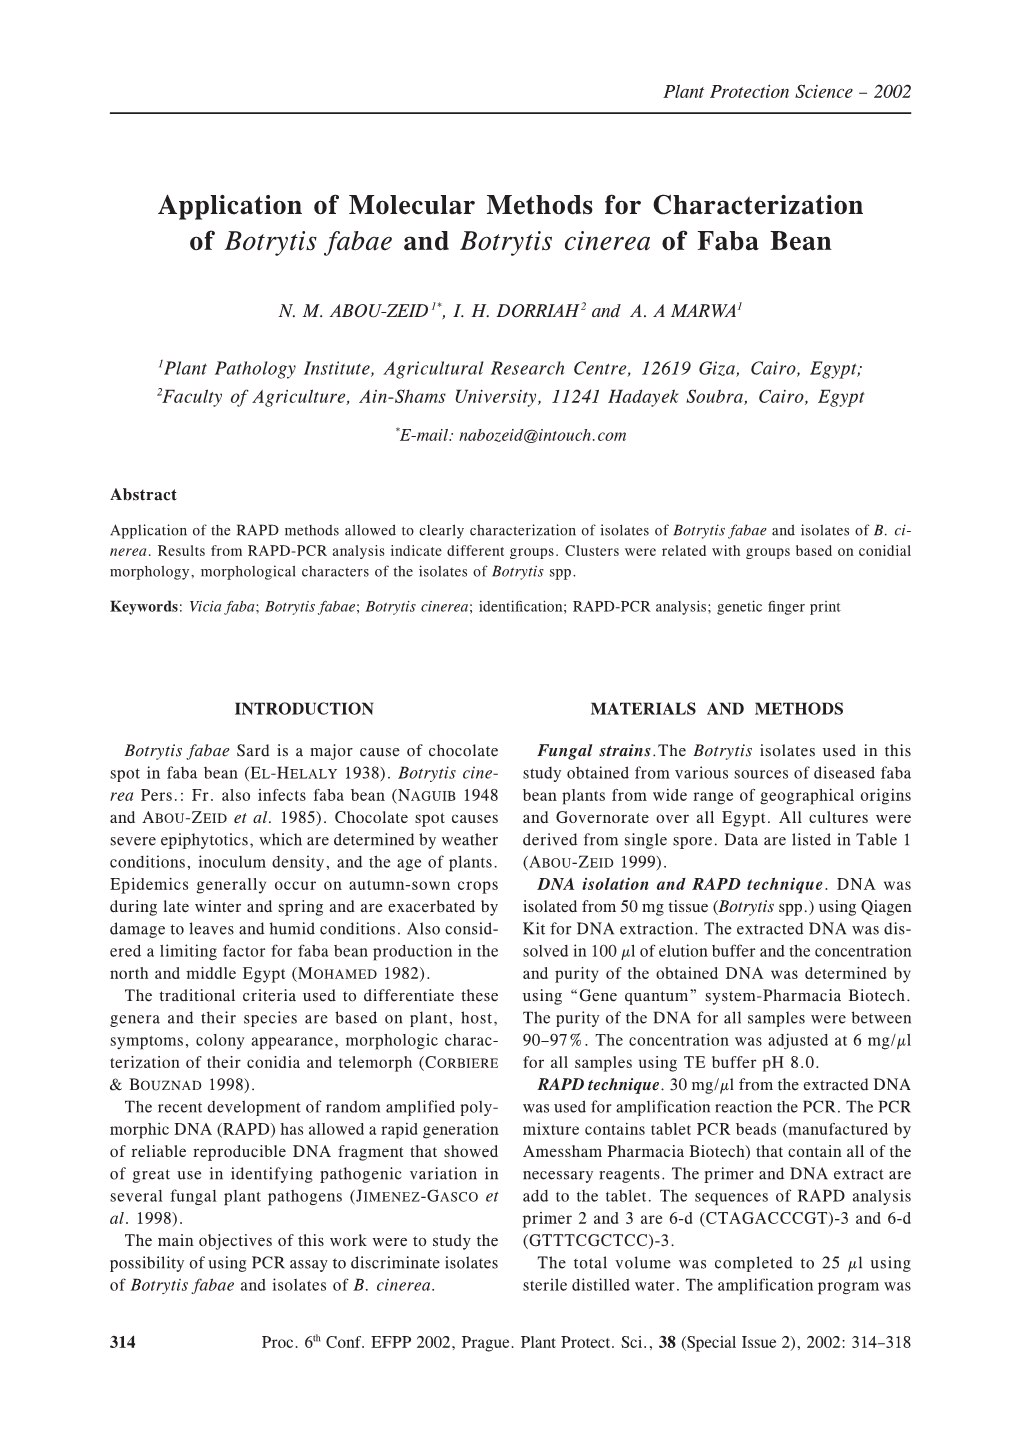 Application of Molecular Methods for Characterization of Botrytis Fabae and Botrytis Cinerea of Faba Bean